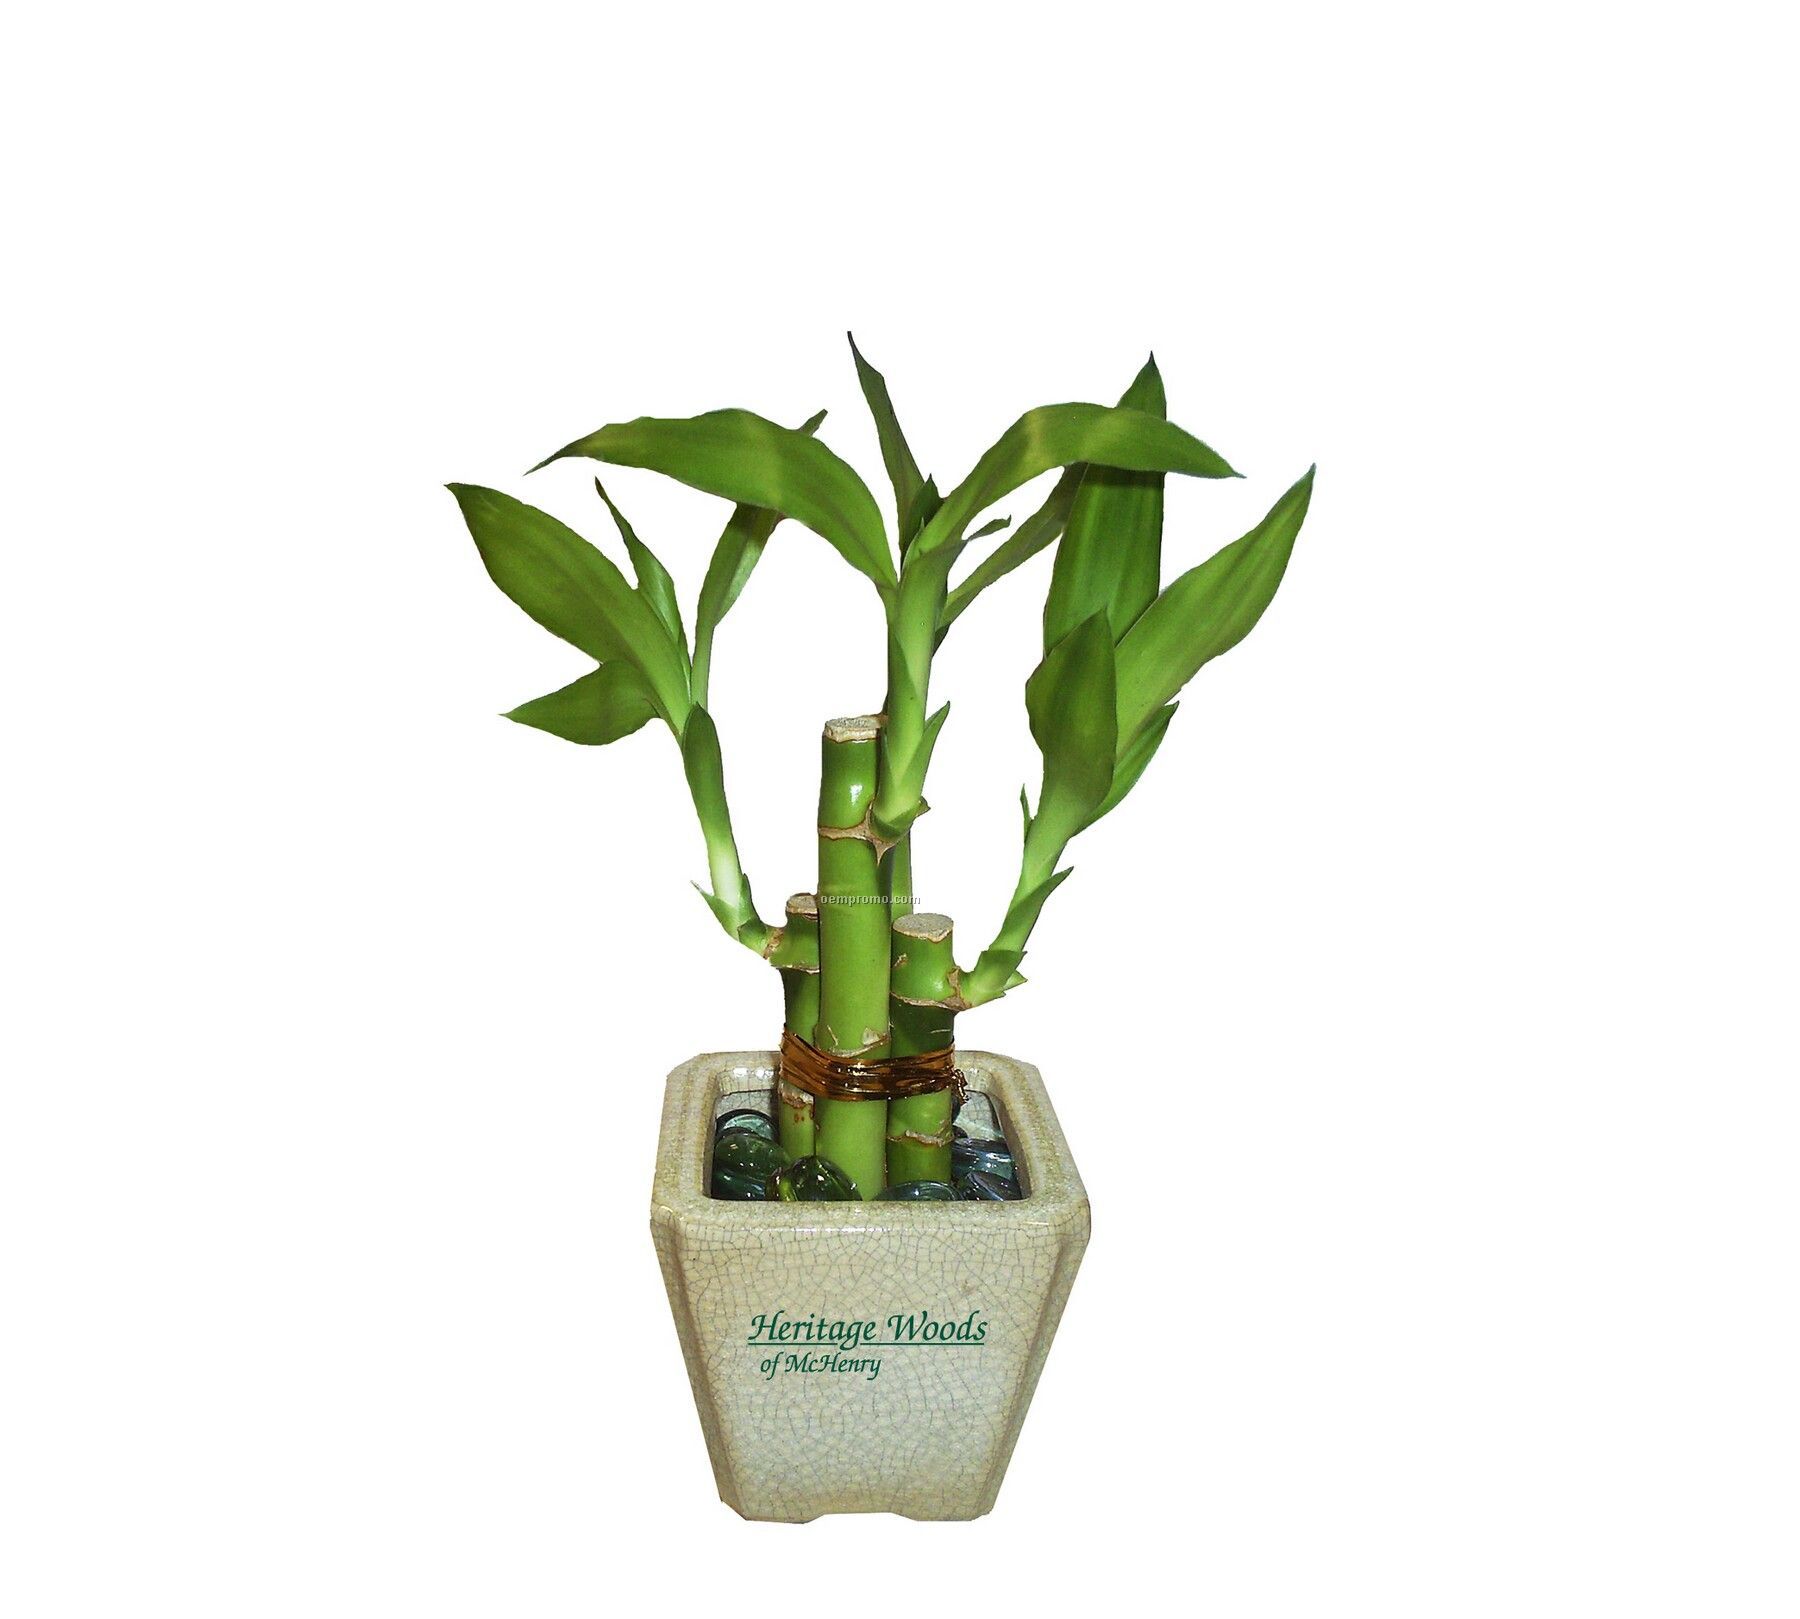 4-shoot Lucky Bamboo Plant In Ceramic Pot & Marbles